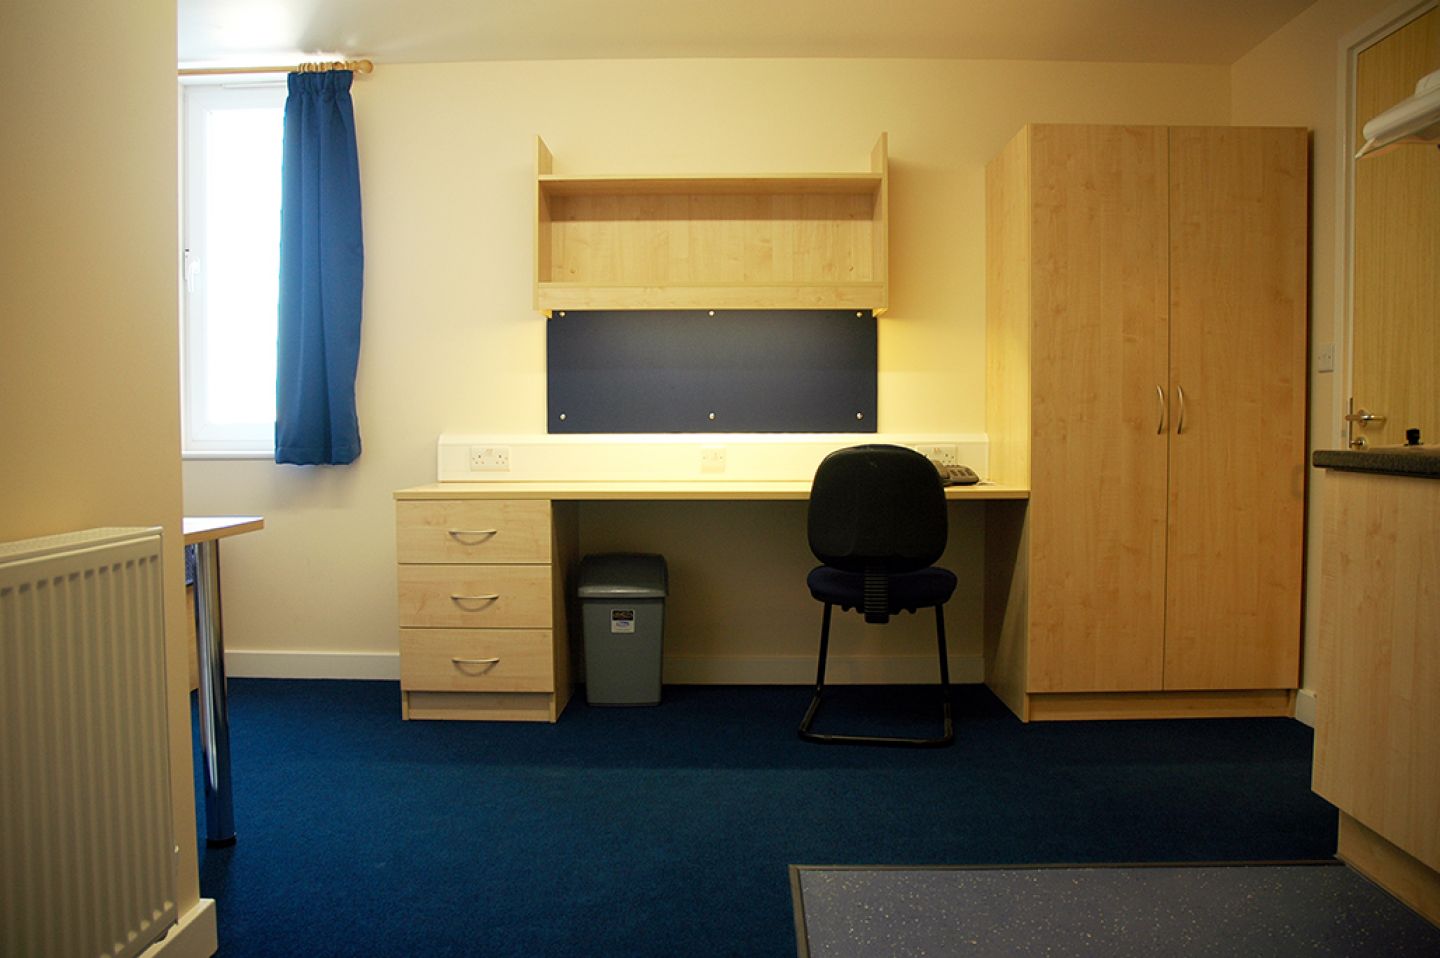 View of a studio room showing the wide desk and wardrobe. There is also a radiator visible facing the kitchen area.